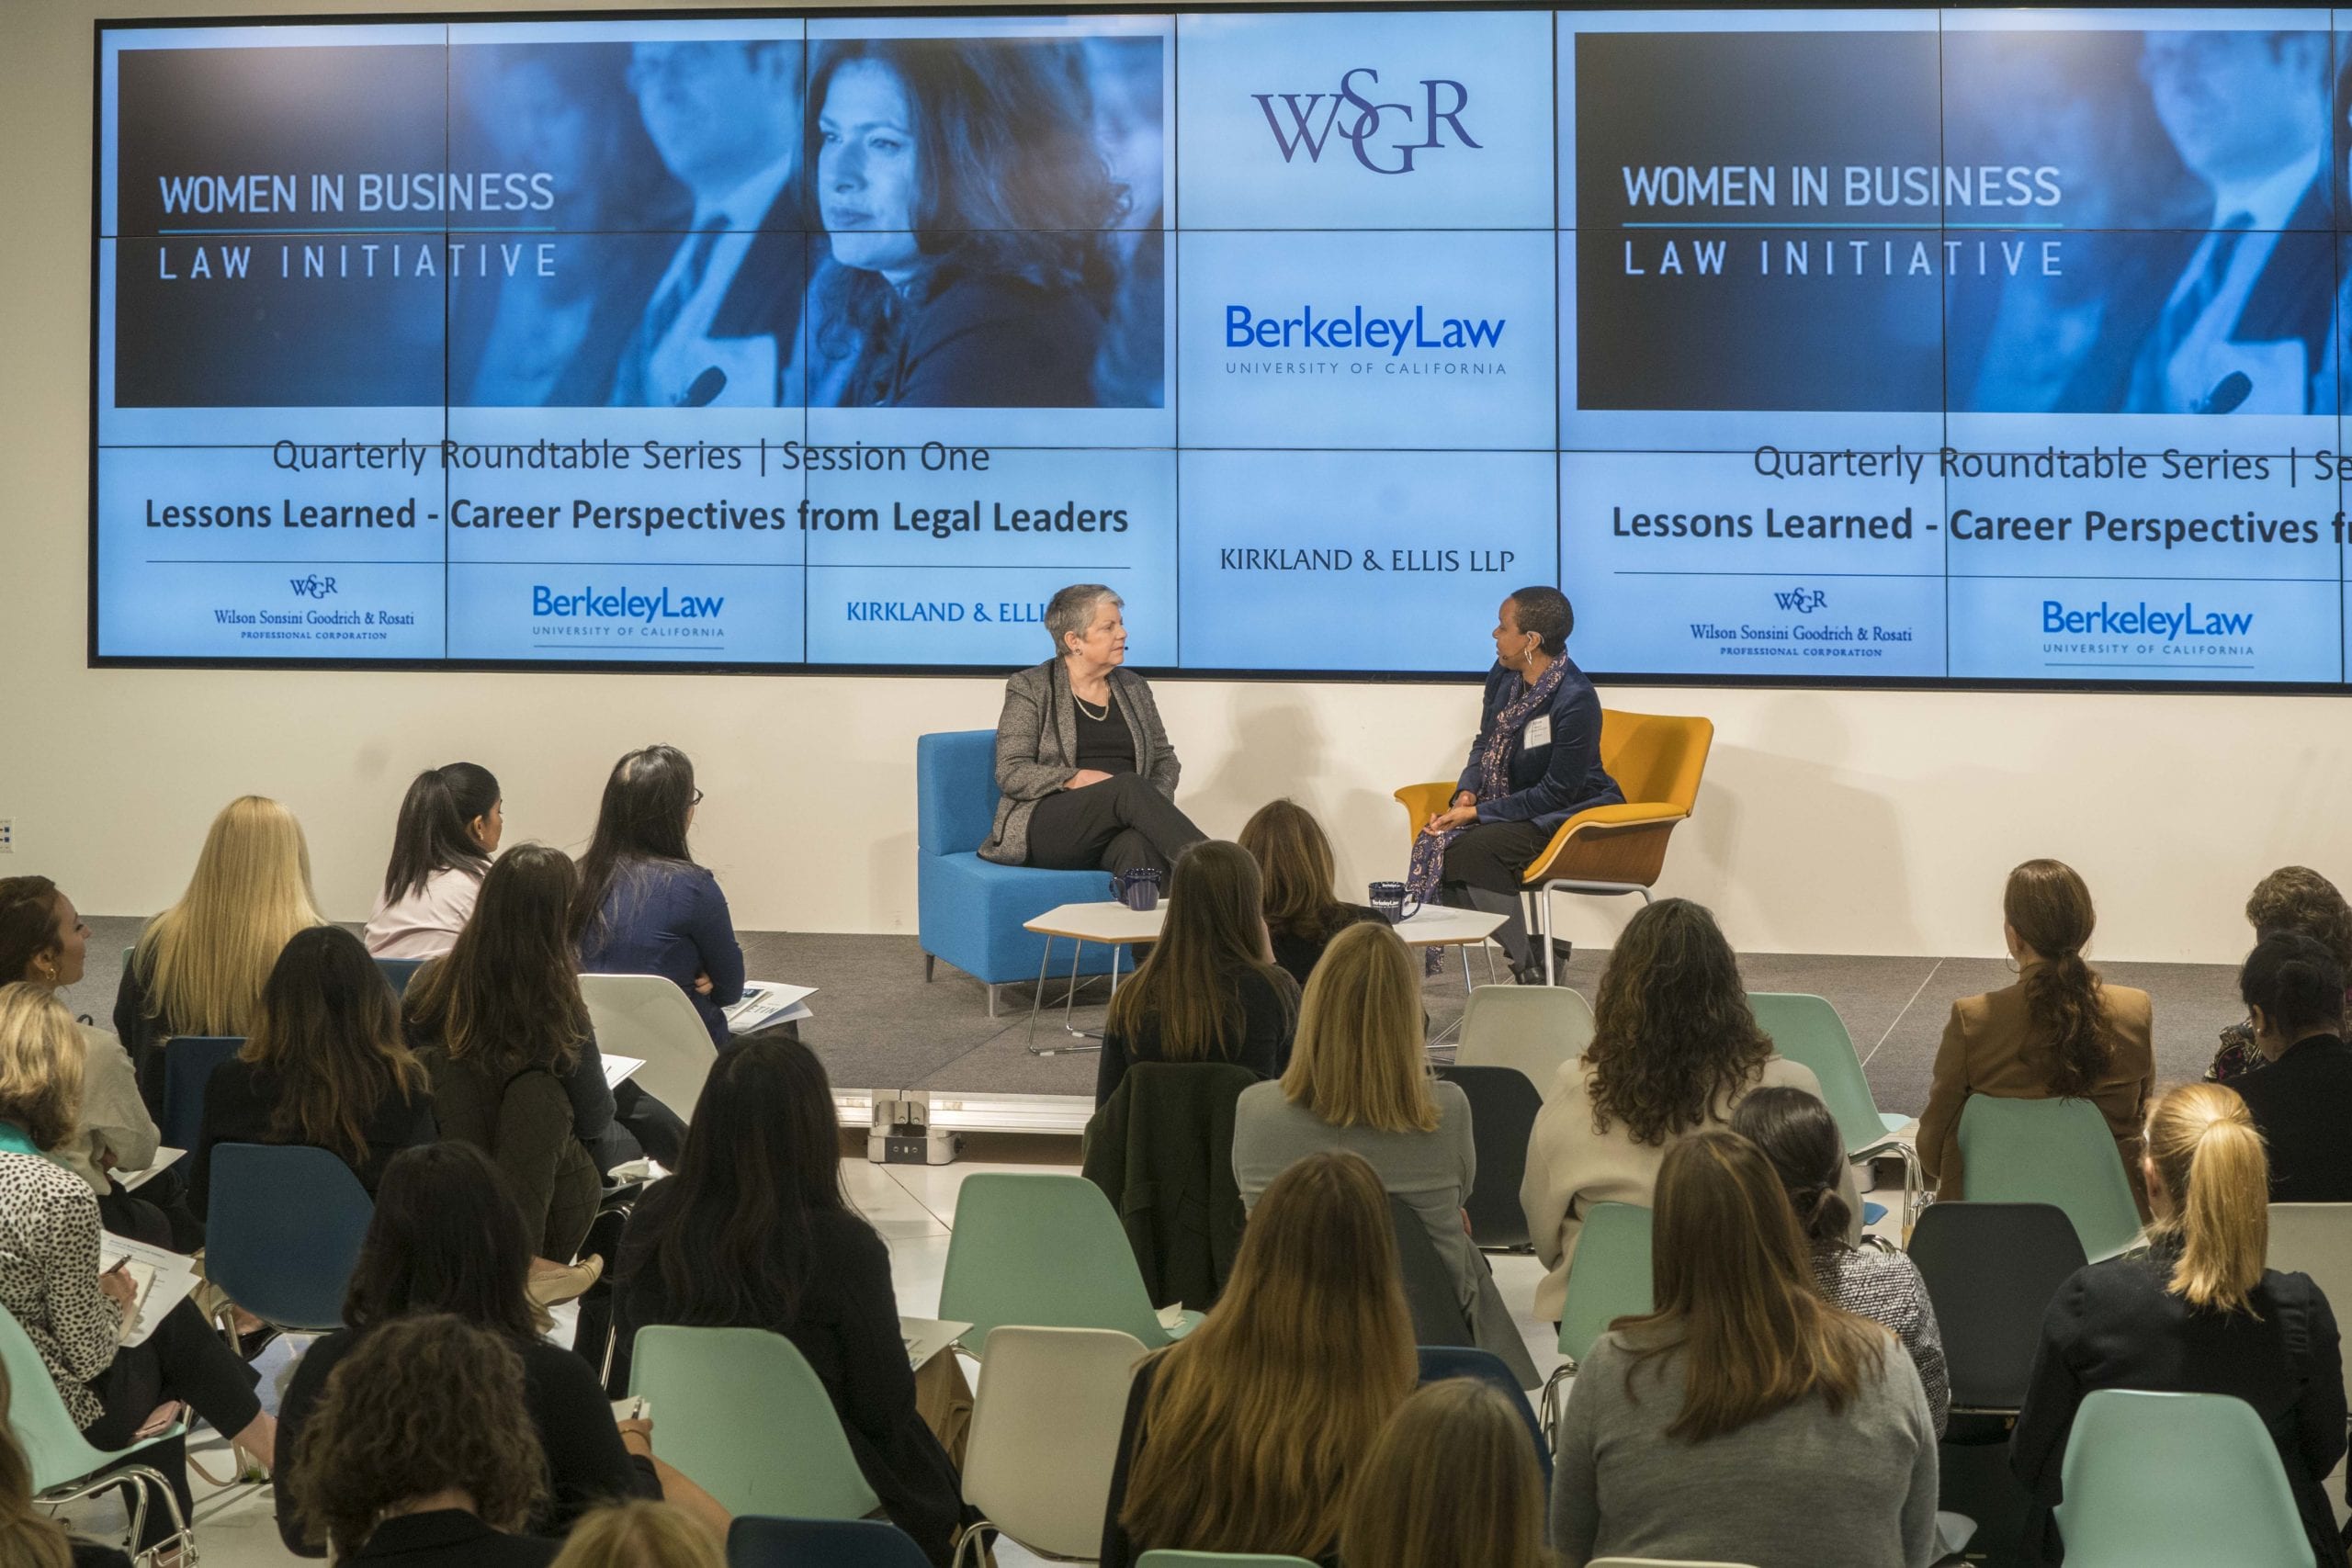 Women in Business Law Initiative Quarterly Roundtable Series, March 15, 2019